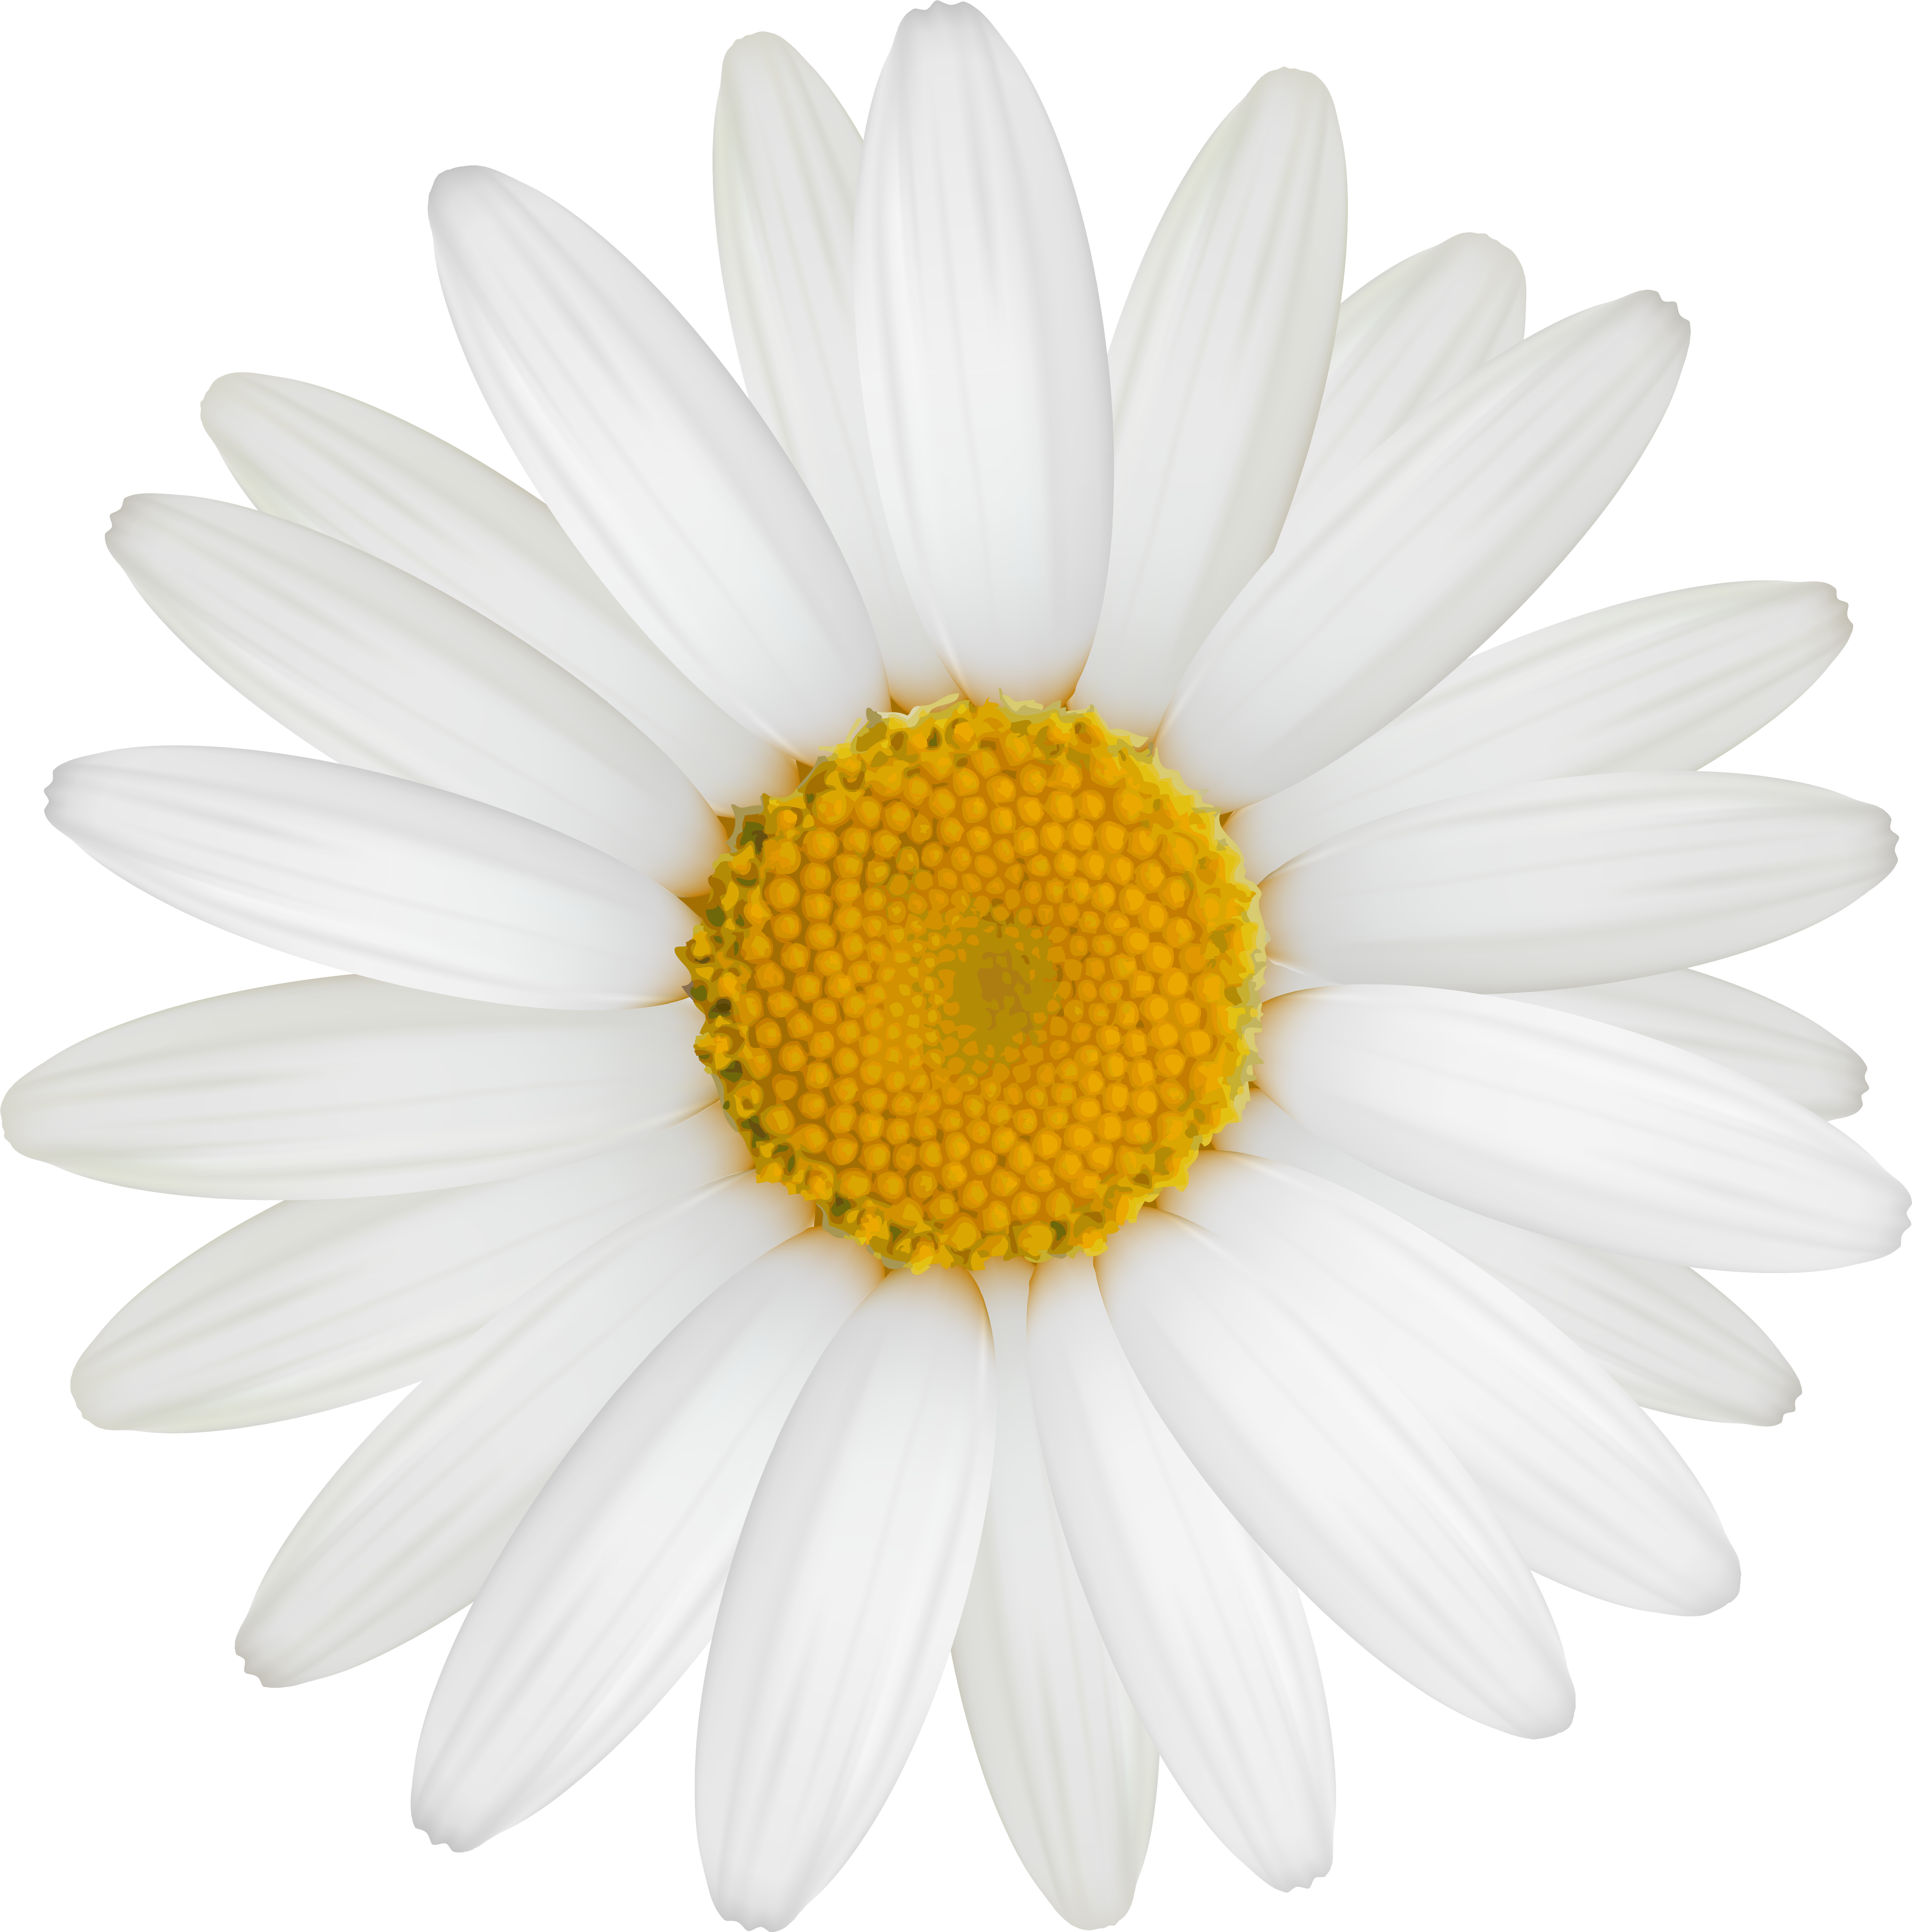 Daisy Png Clipart Image Transparent Daisy Png